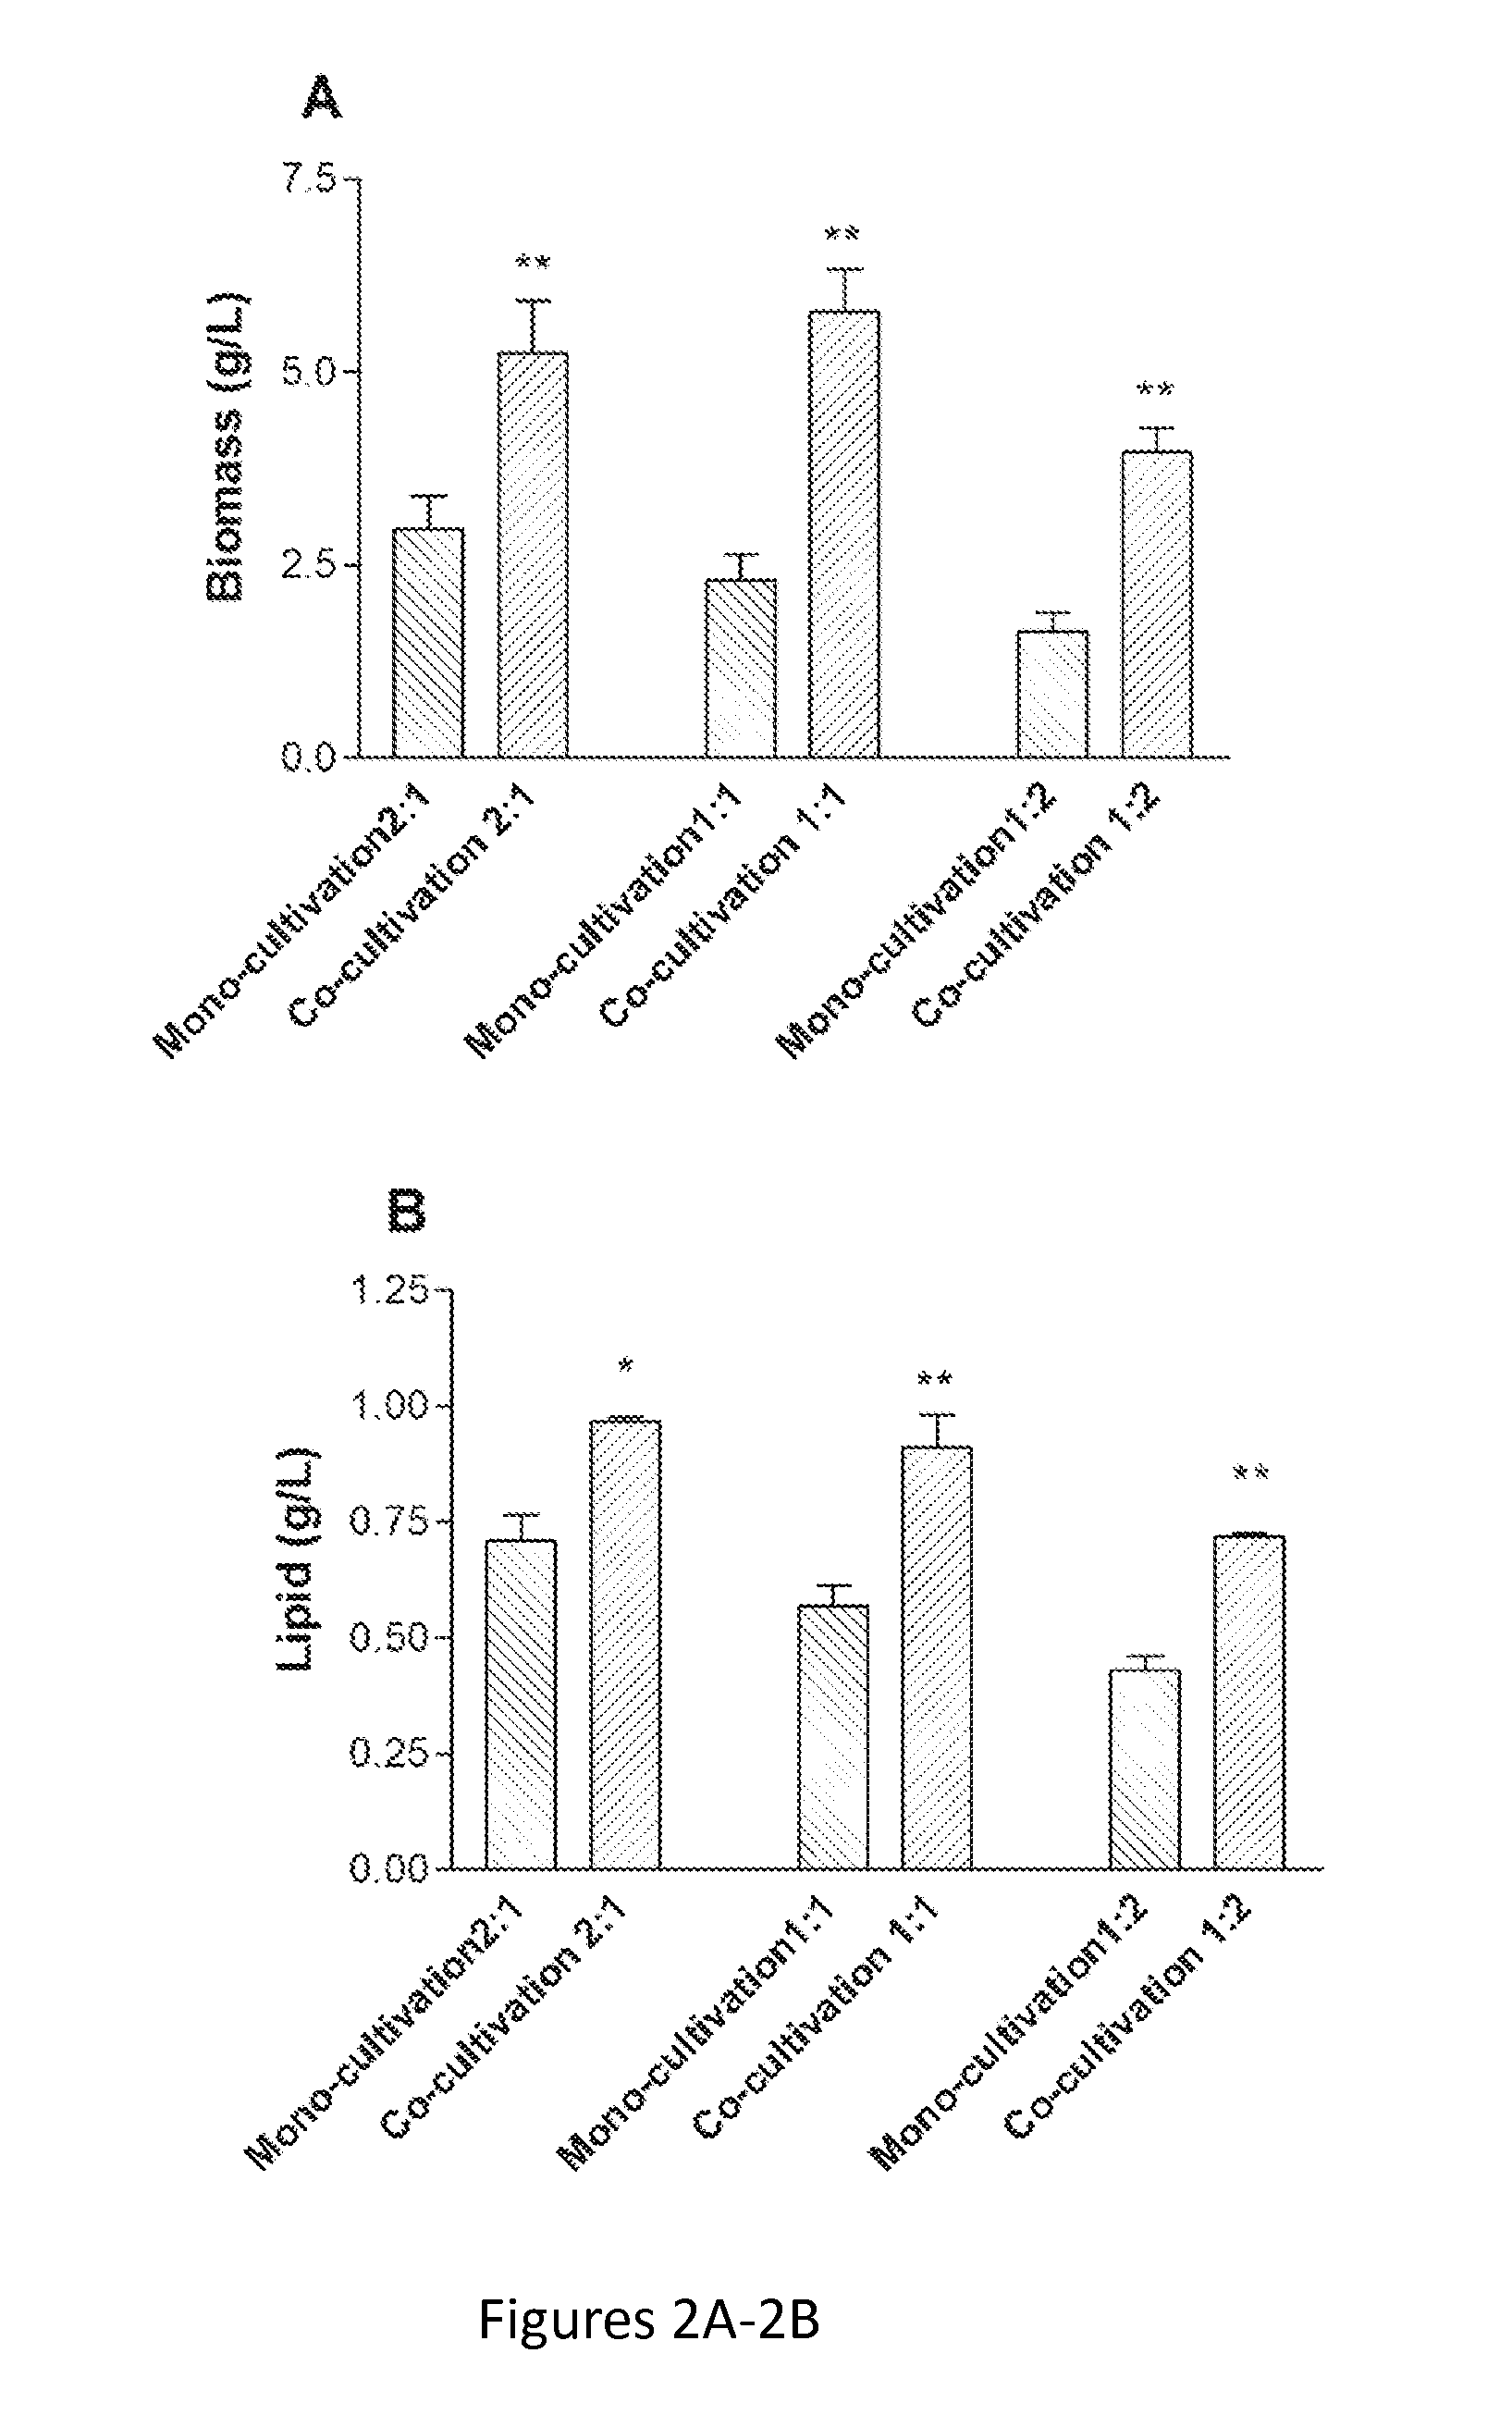 System and Method of Co-Cultivating Microalgae with Fungus